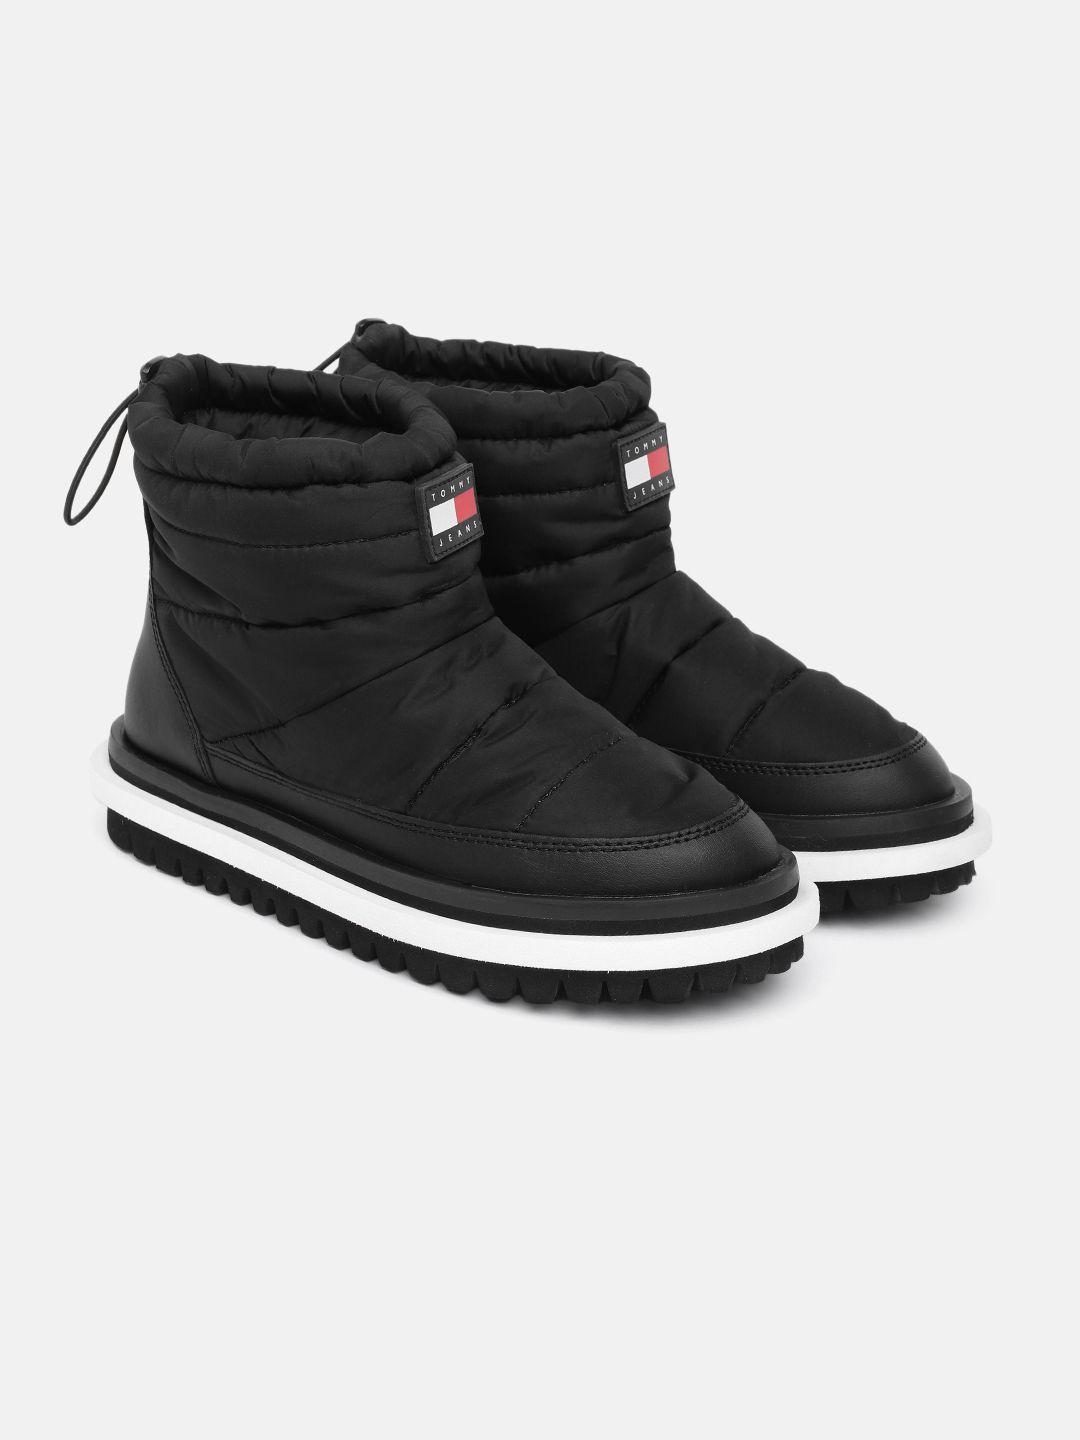 tommy-hilfiger-women-solid-padded-flat-high-top-winter-boots